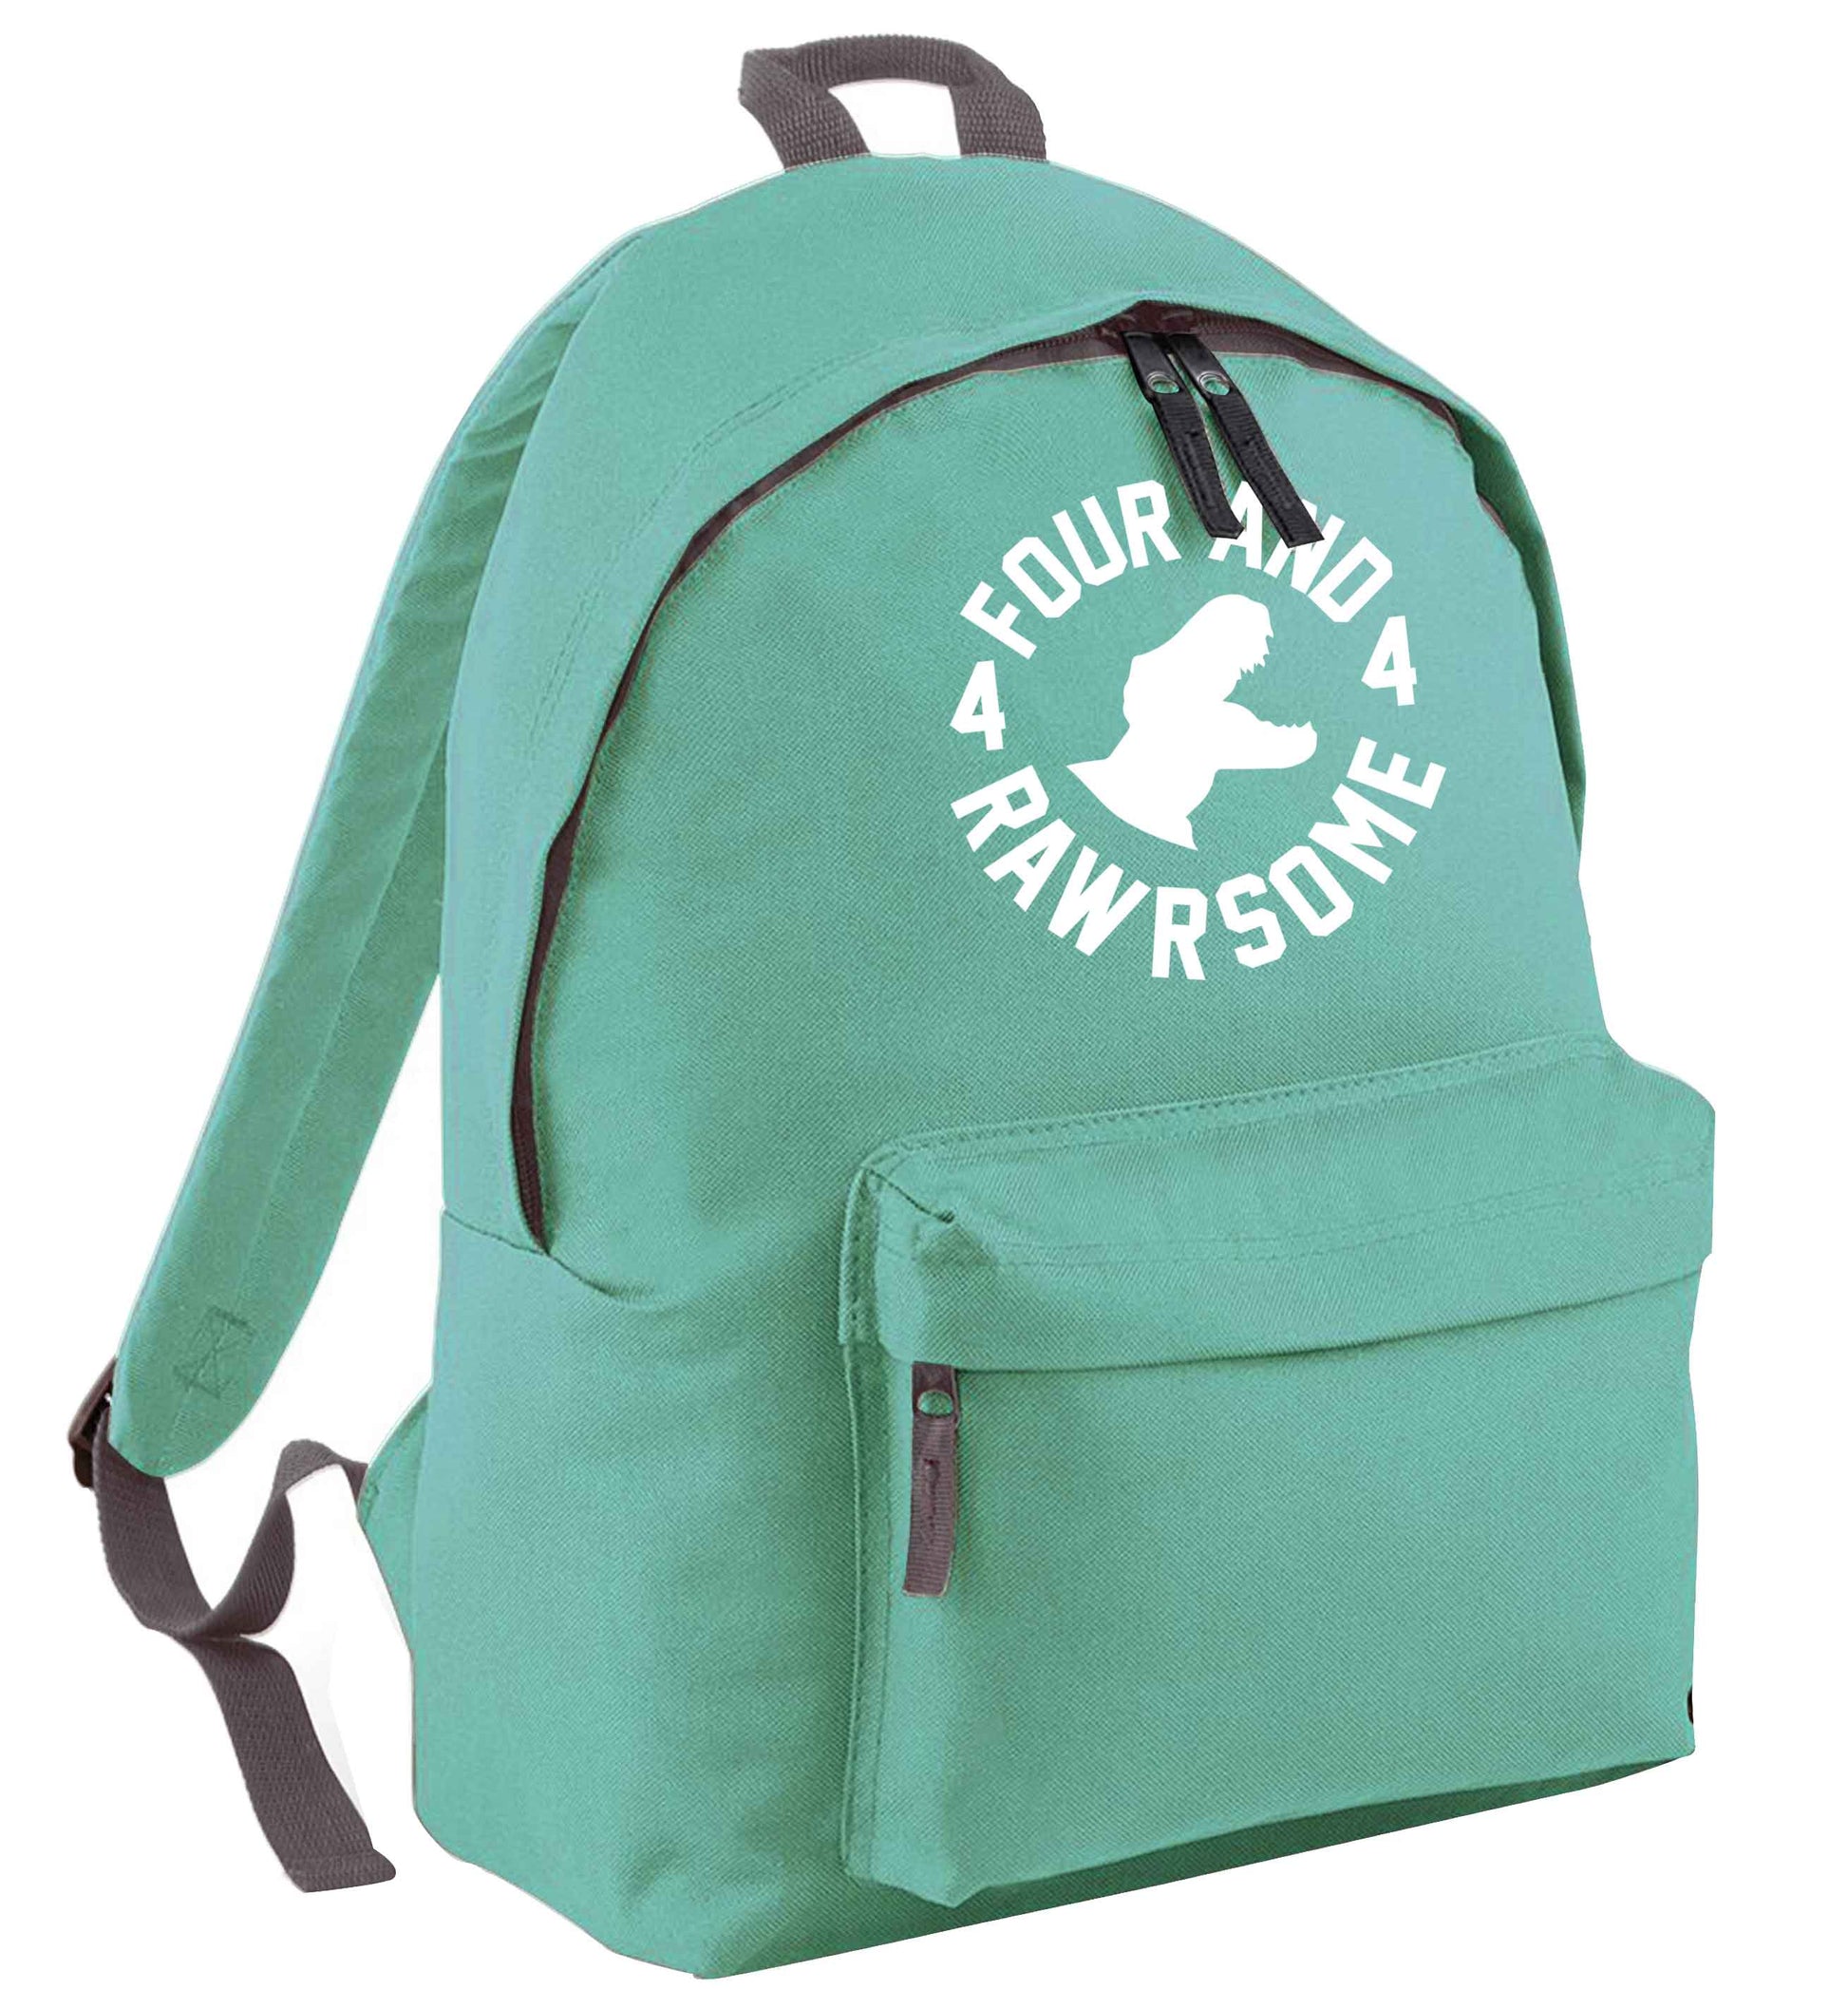 Four and rawrsome mint adults backpack